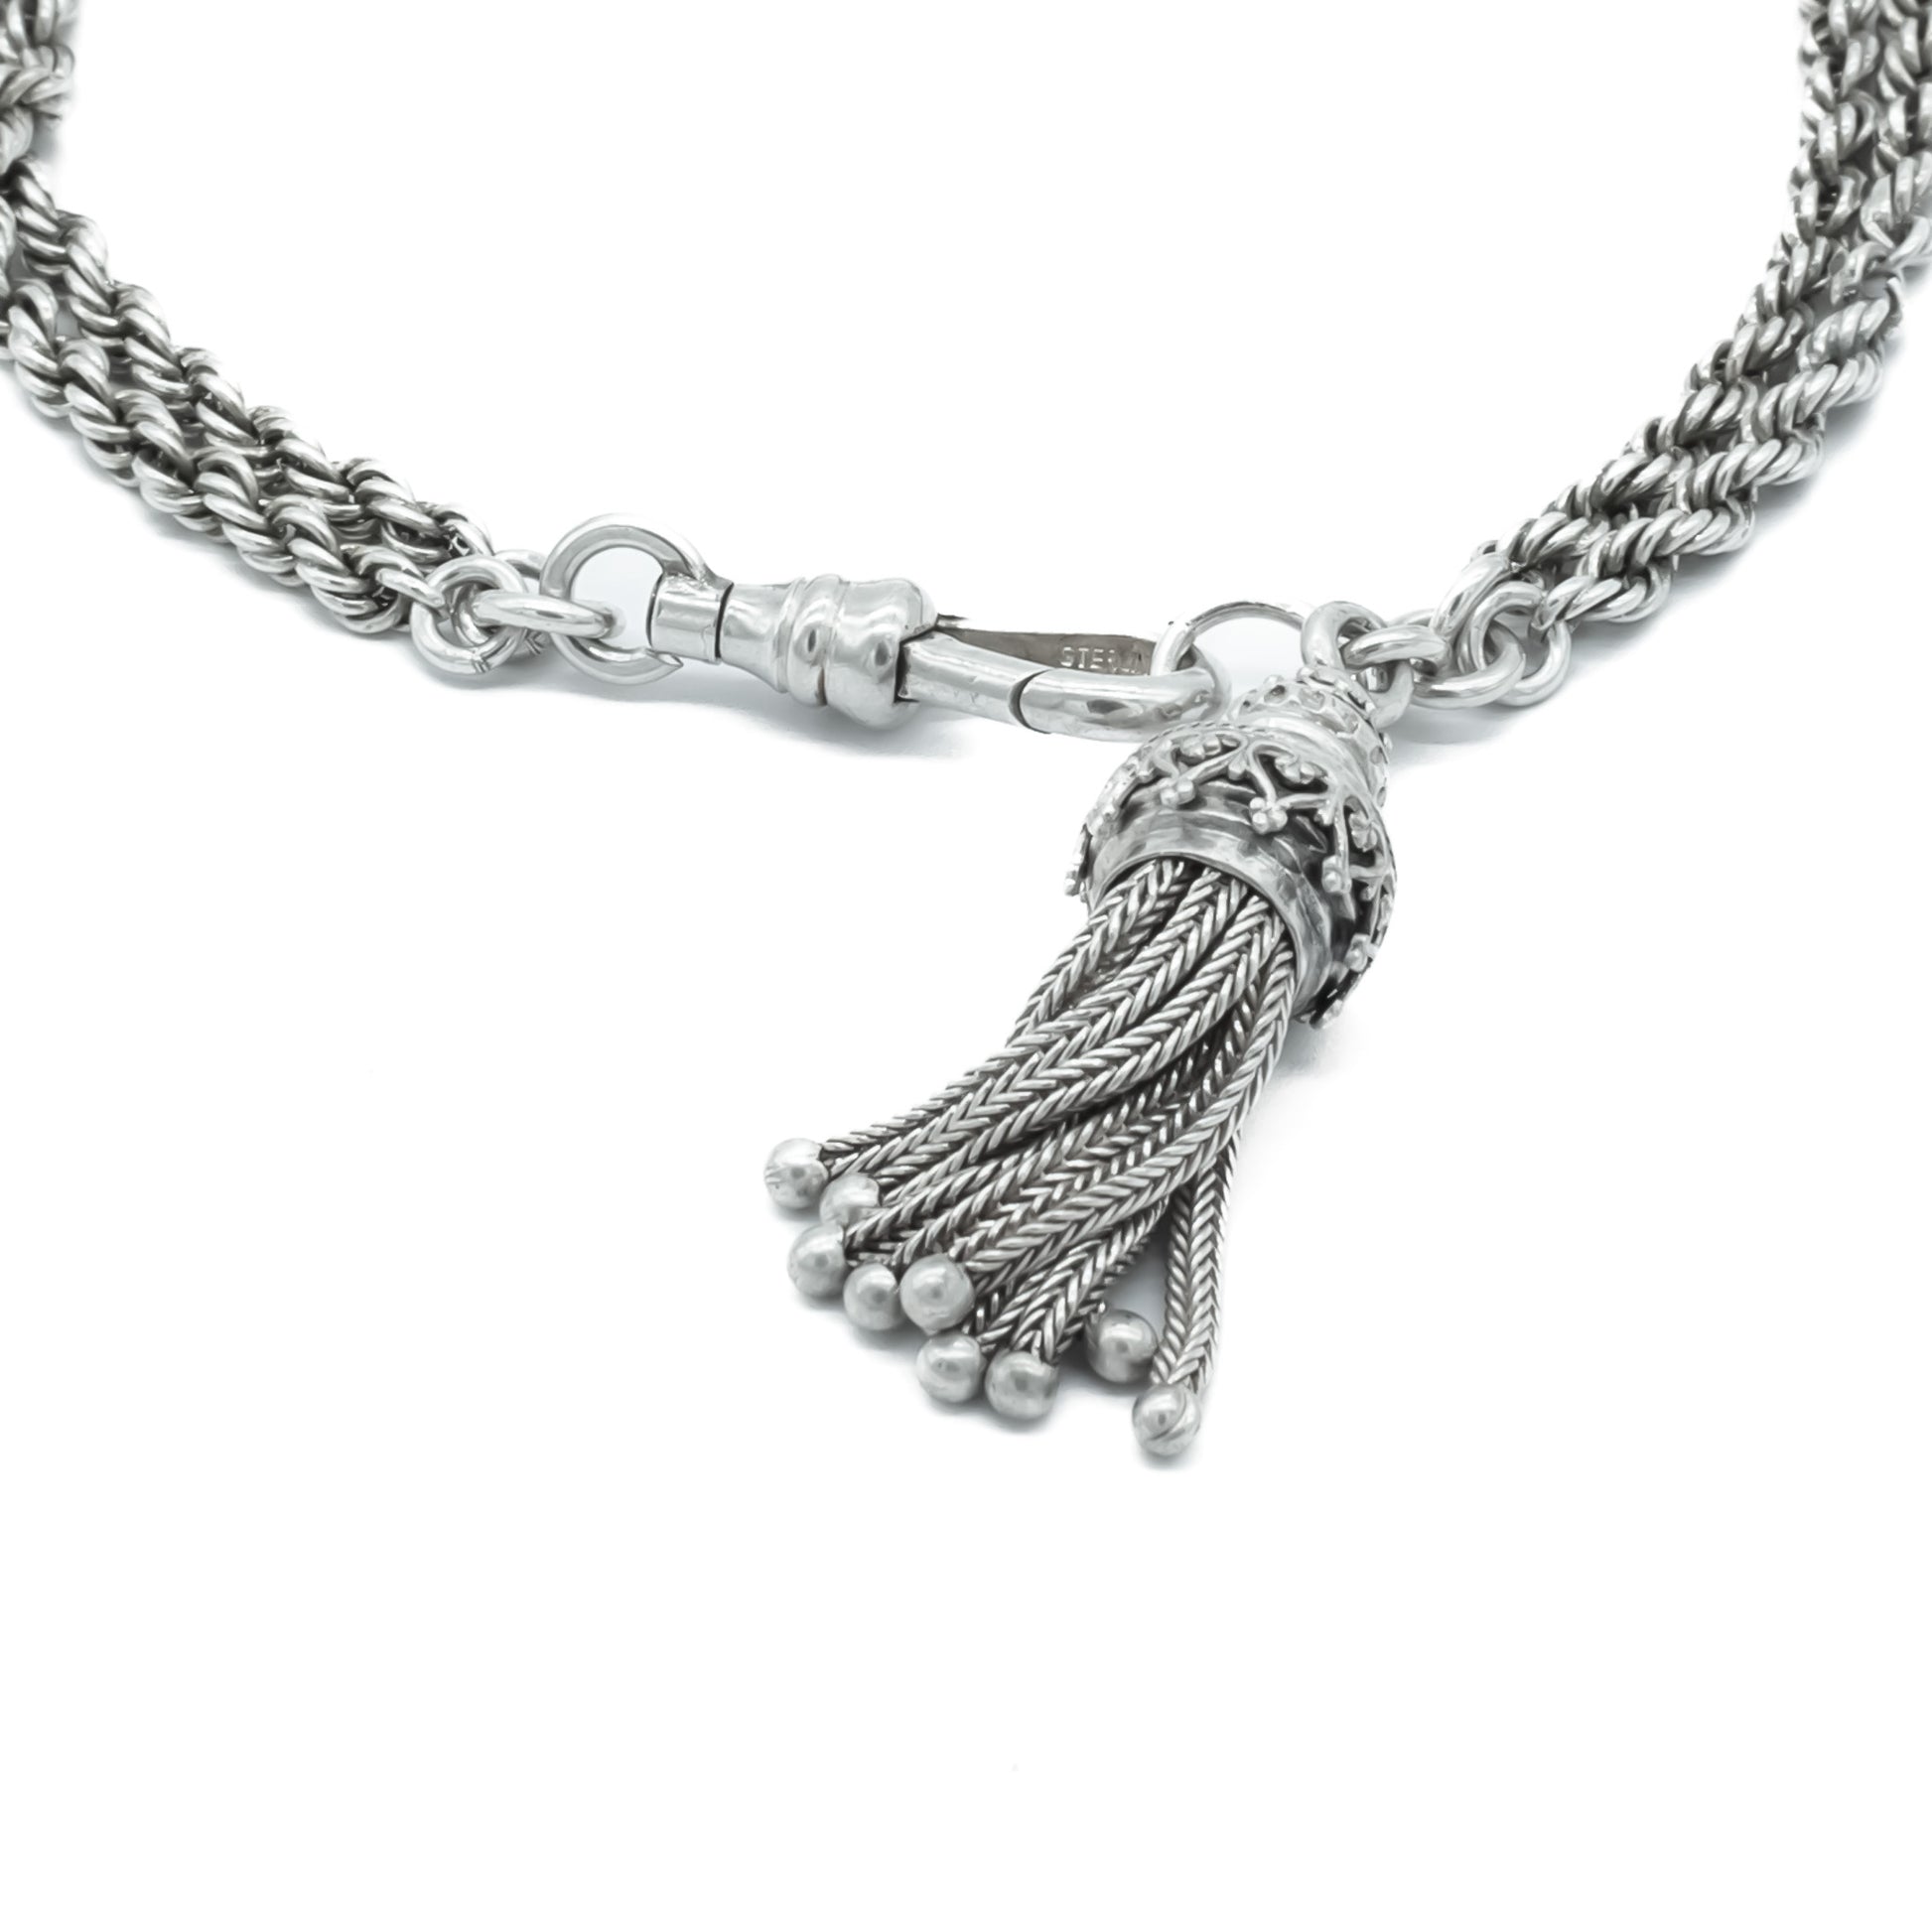 Lovely Victorian albertina bracelet with two beautifully embossed silver beads, a tassel and dog clip.